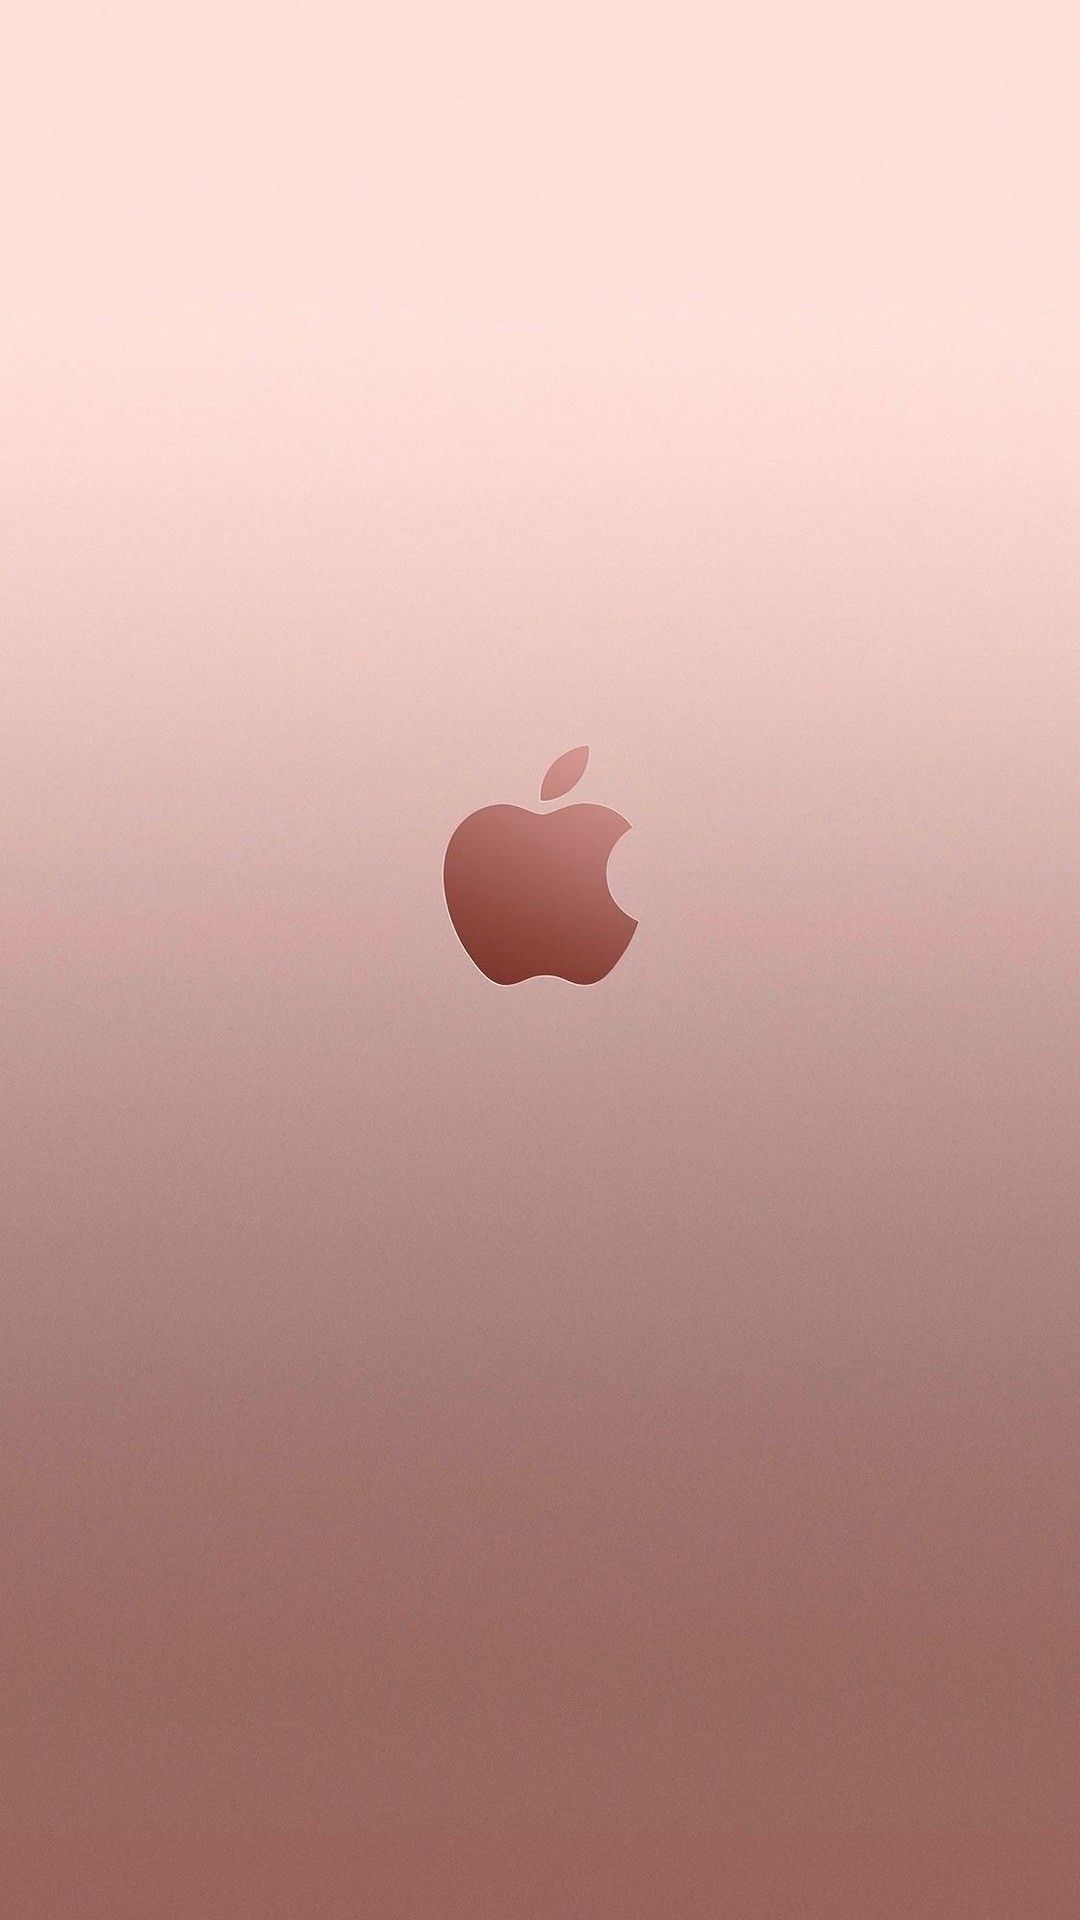 A pink apple logo on the wall - Gold, black rose